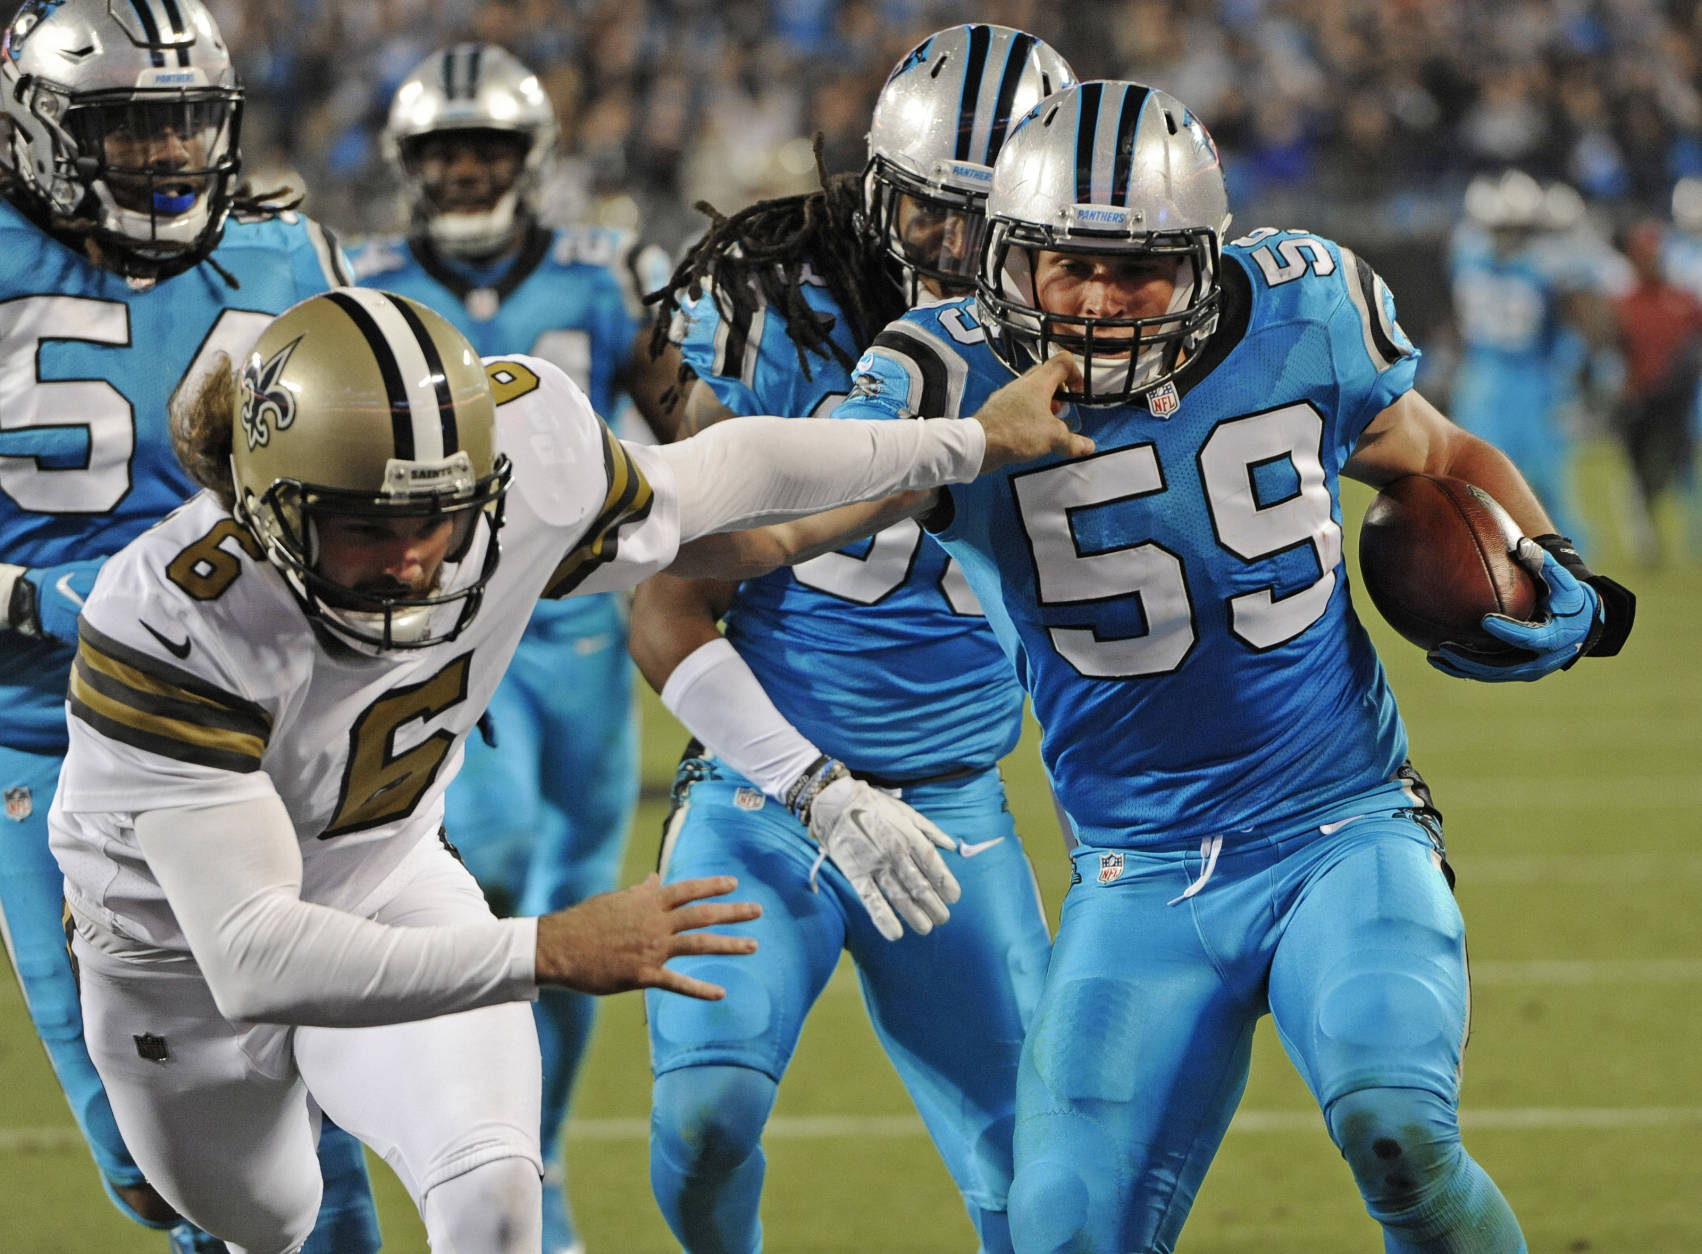 Carolina Panthers' Luke Kuechly (59) runs past New Orleans Saints' Thomas Morstead (6) as he returns a blocked field goal attempt in the first half of an NFL football game in Charlotte, N.C., Thursday, Nov. 17, 2016. (AP Photo/Mike McCarn)